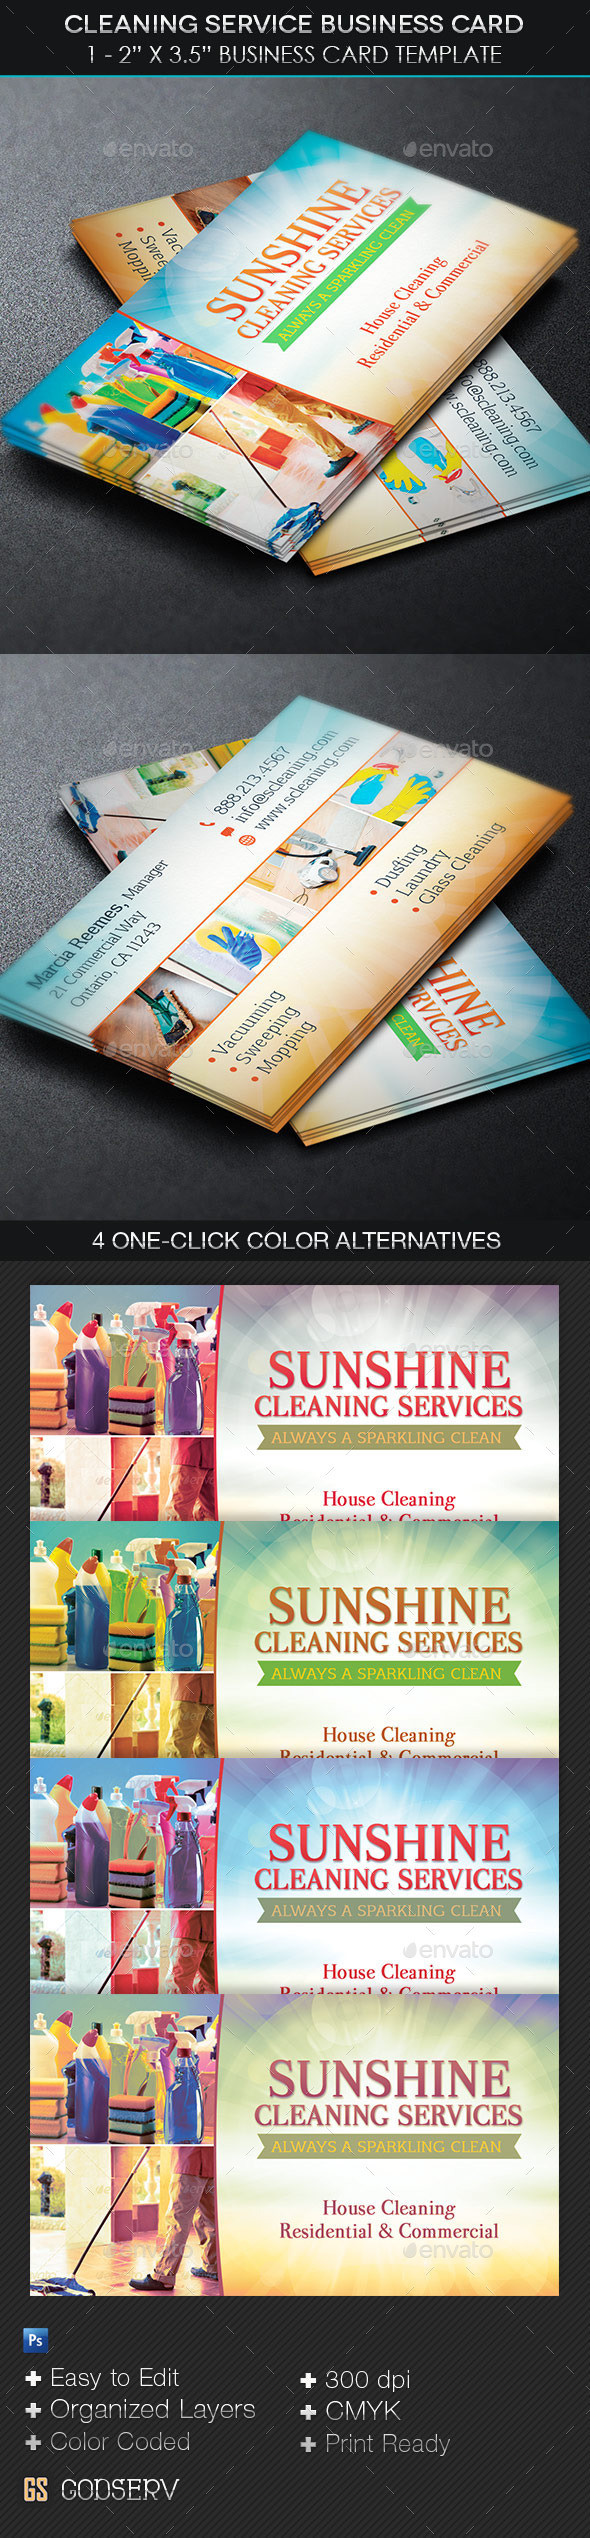 Cleaning service business card template preview